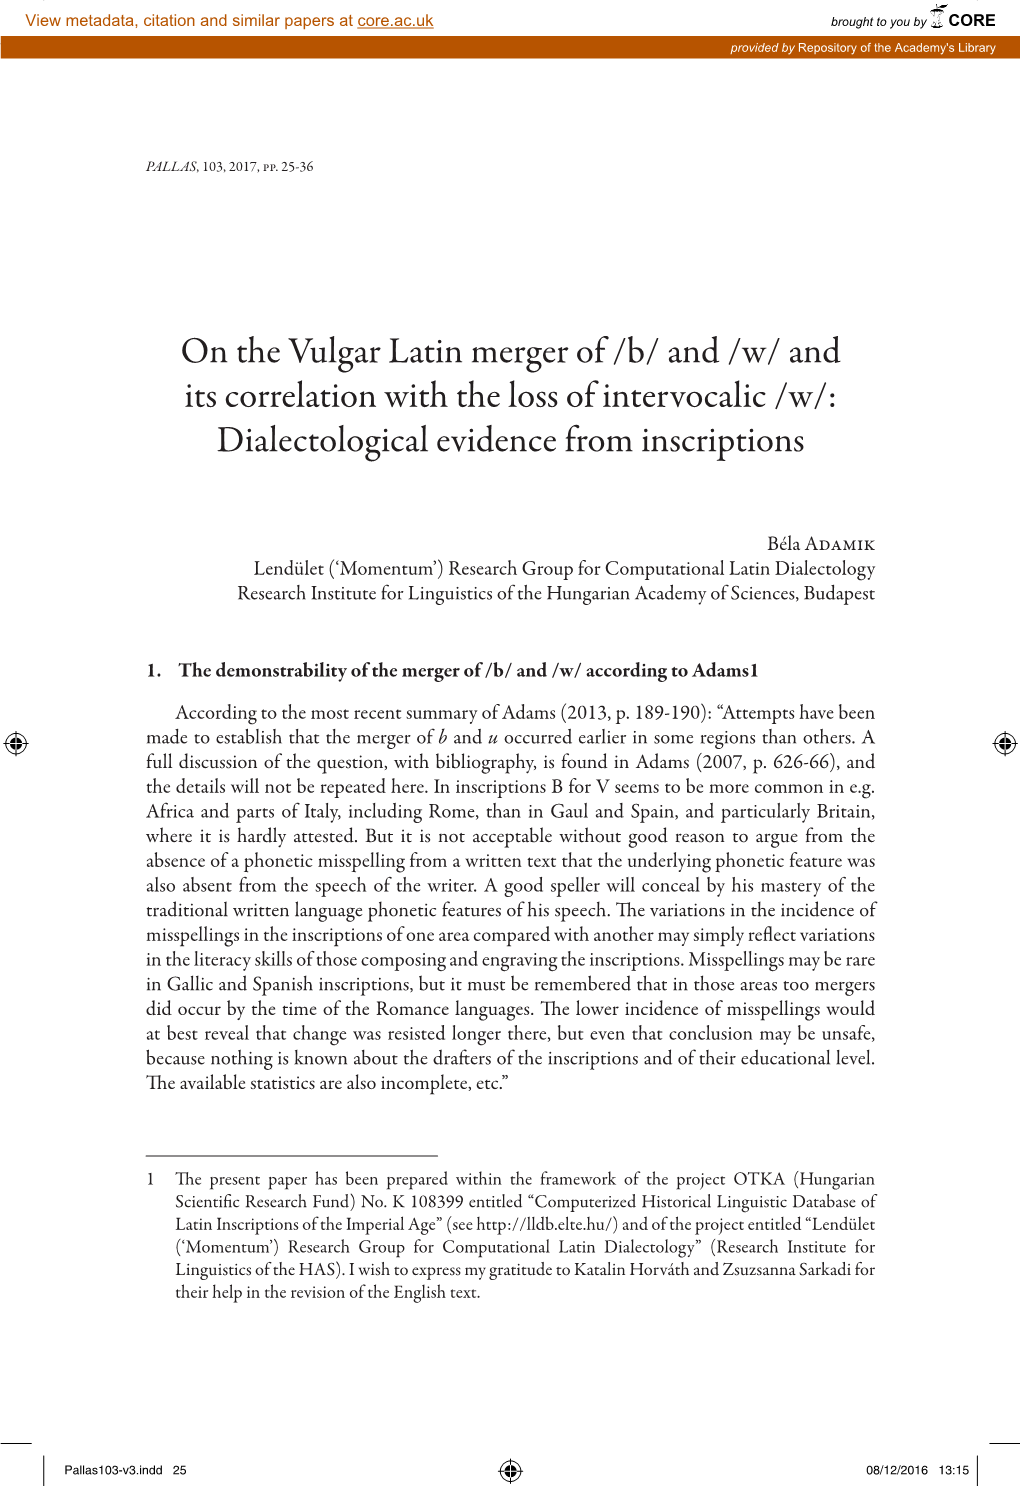 On the Vulgar Latin Merger of /B/ and /W/ and Its Correlation with the Loss of Intervocalic /W/: Dialectological Evidence from Inscriptions